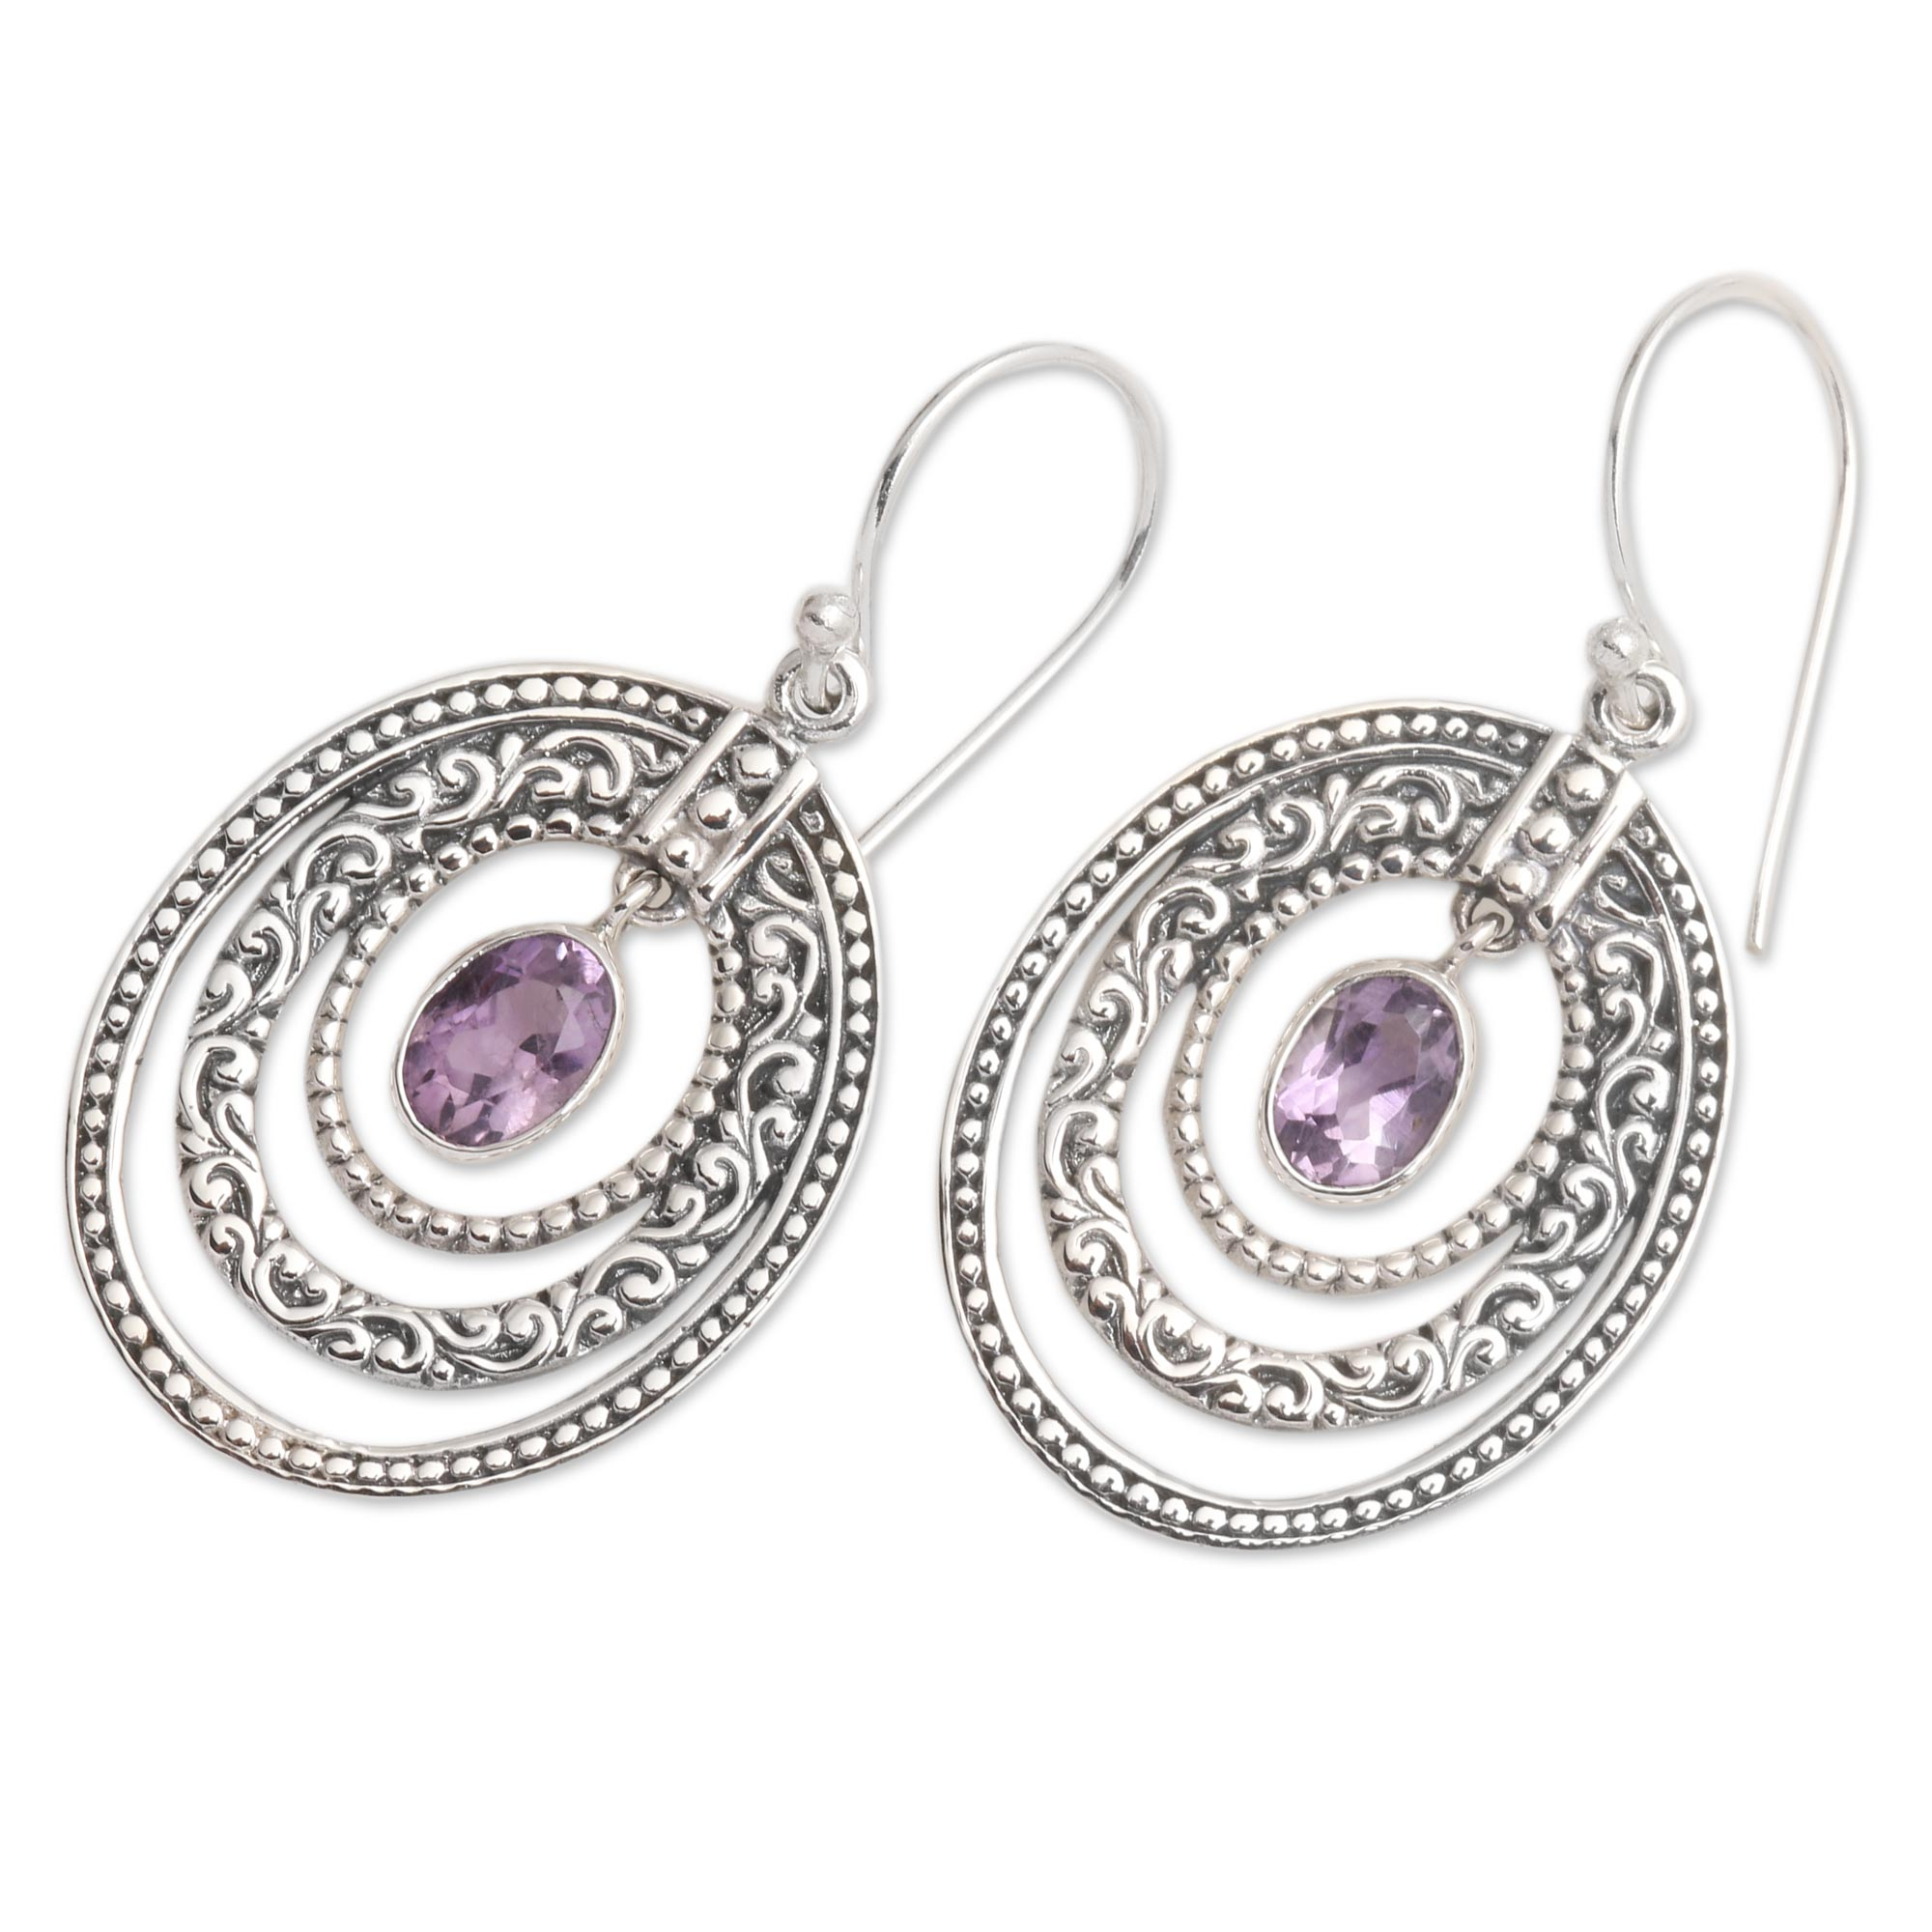 Concentric Circle Amethyst Earrings Balinese Motif - Inner Circles in ...